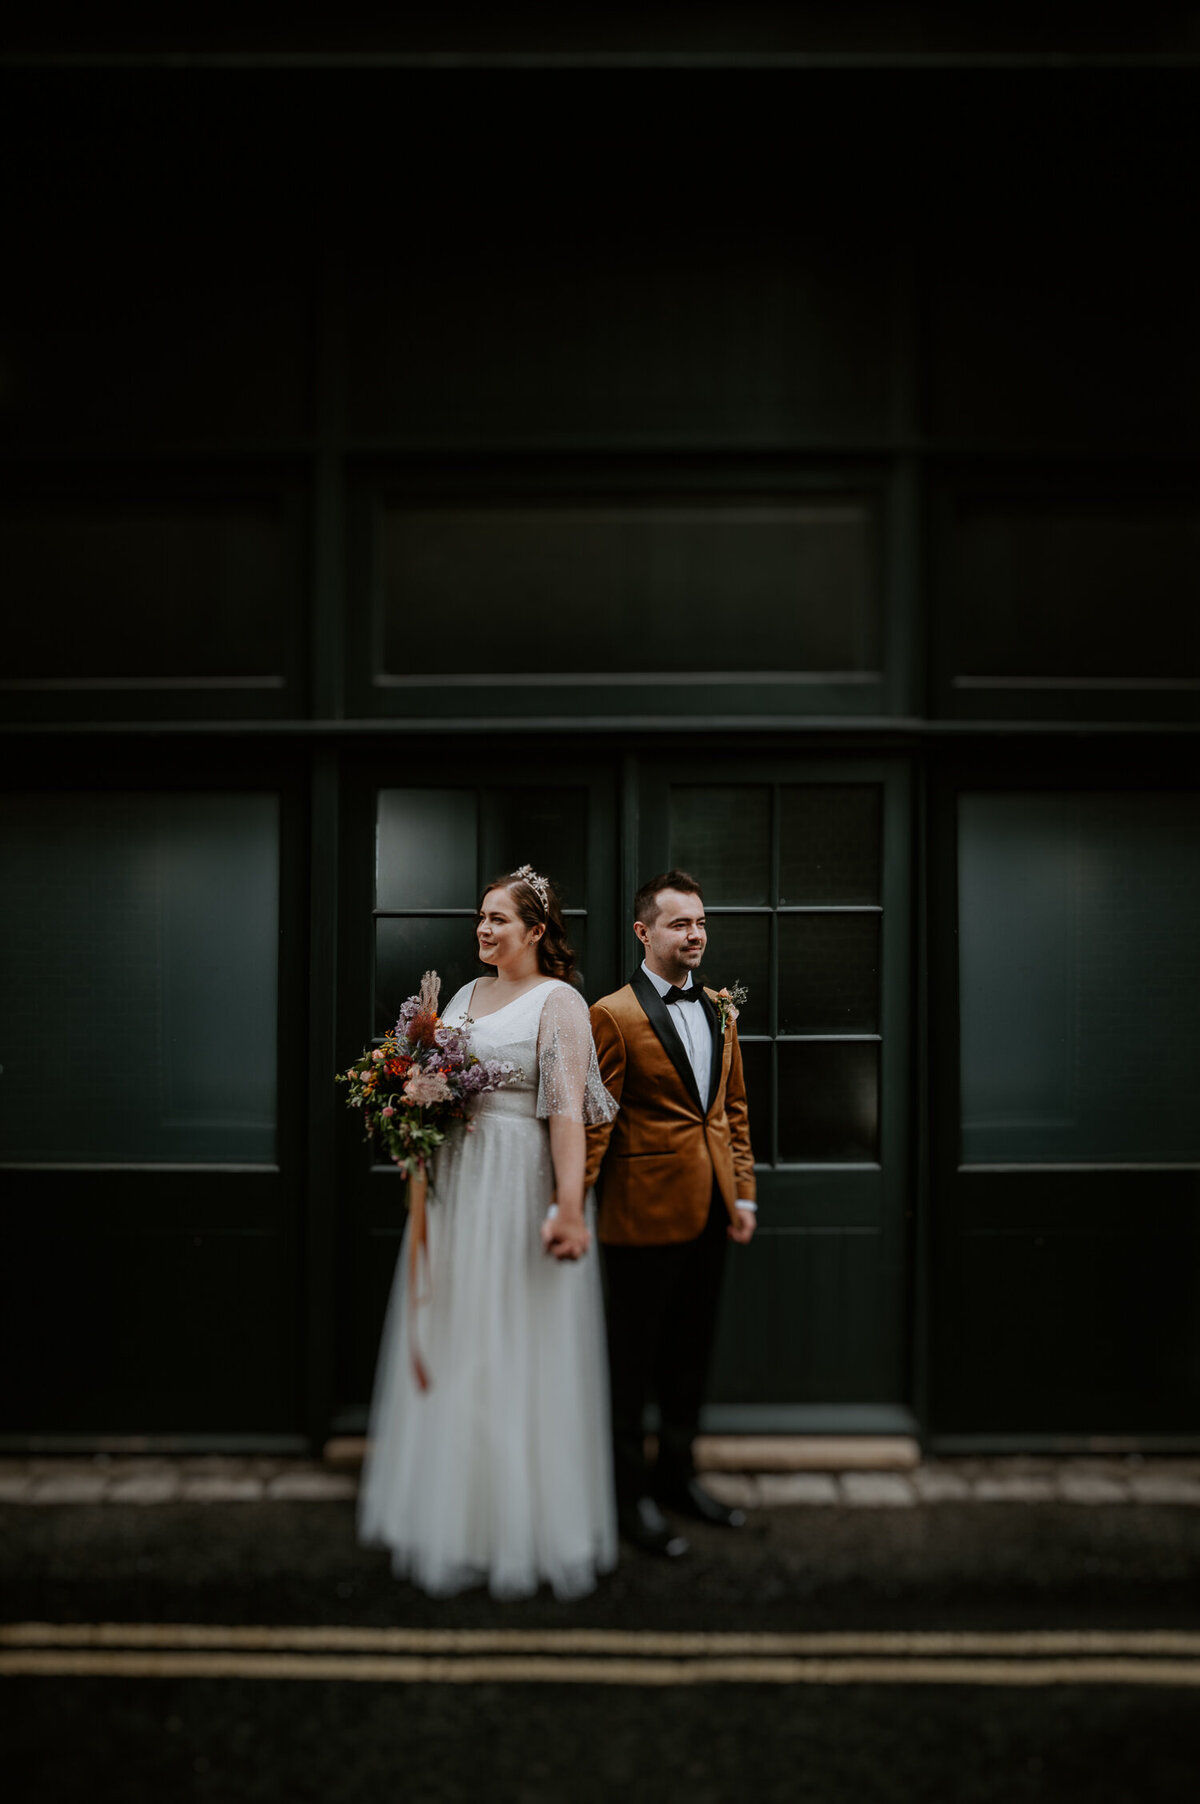 A tilt shift portrait of a wedding couple during their first look. The groom is wearing an orange velvet jacket and the bride is wearing a wedding dress with stars. This was taken in St Andrews Wharf in London. They then went onto getting married at The Asylum in Peckham.